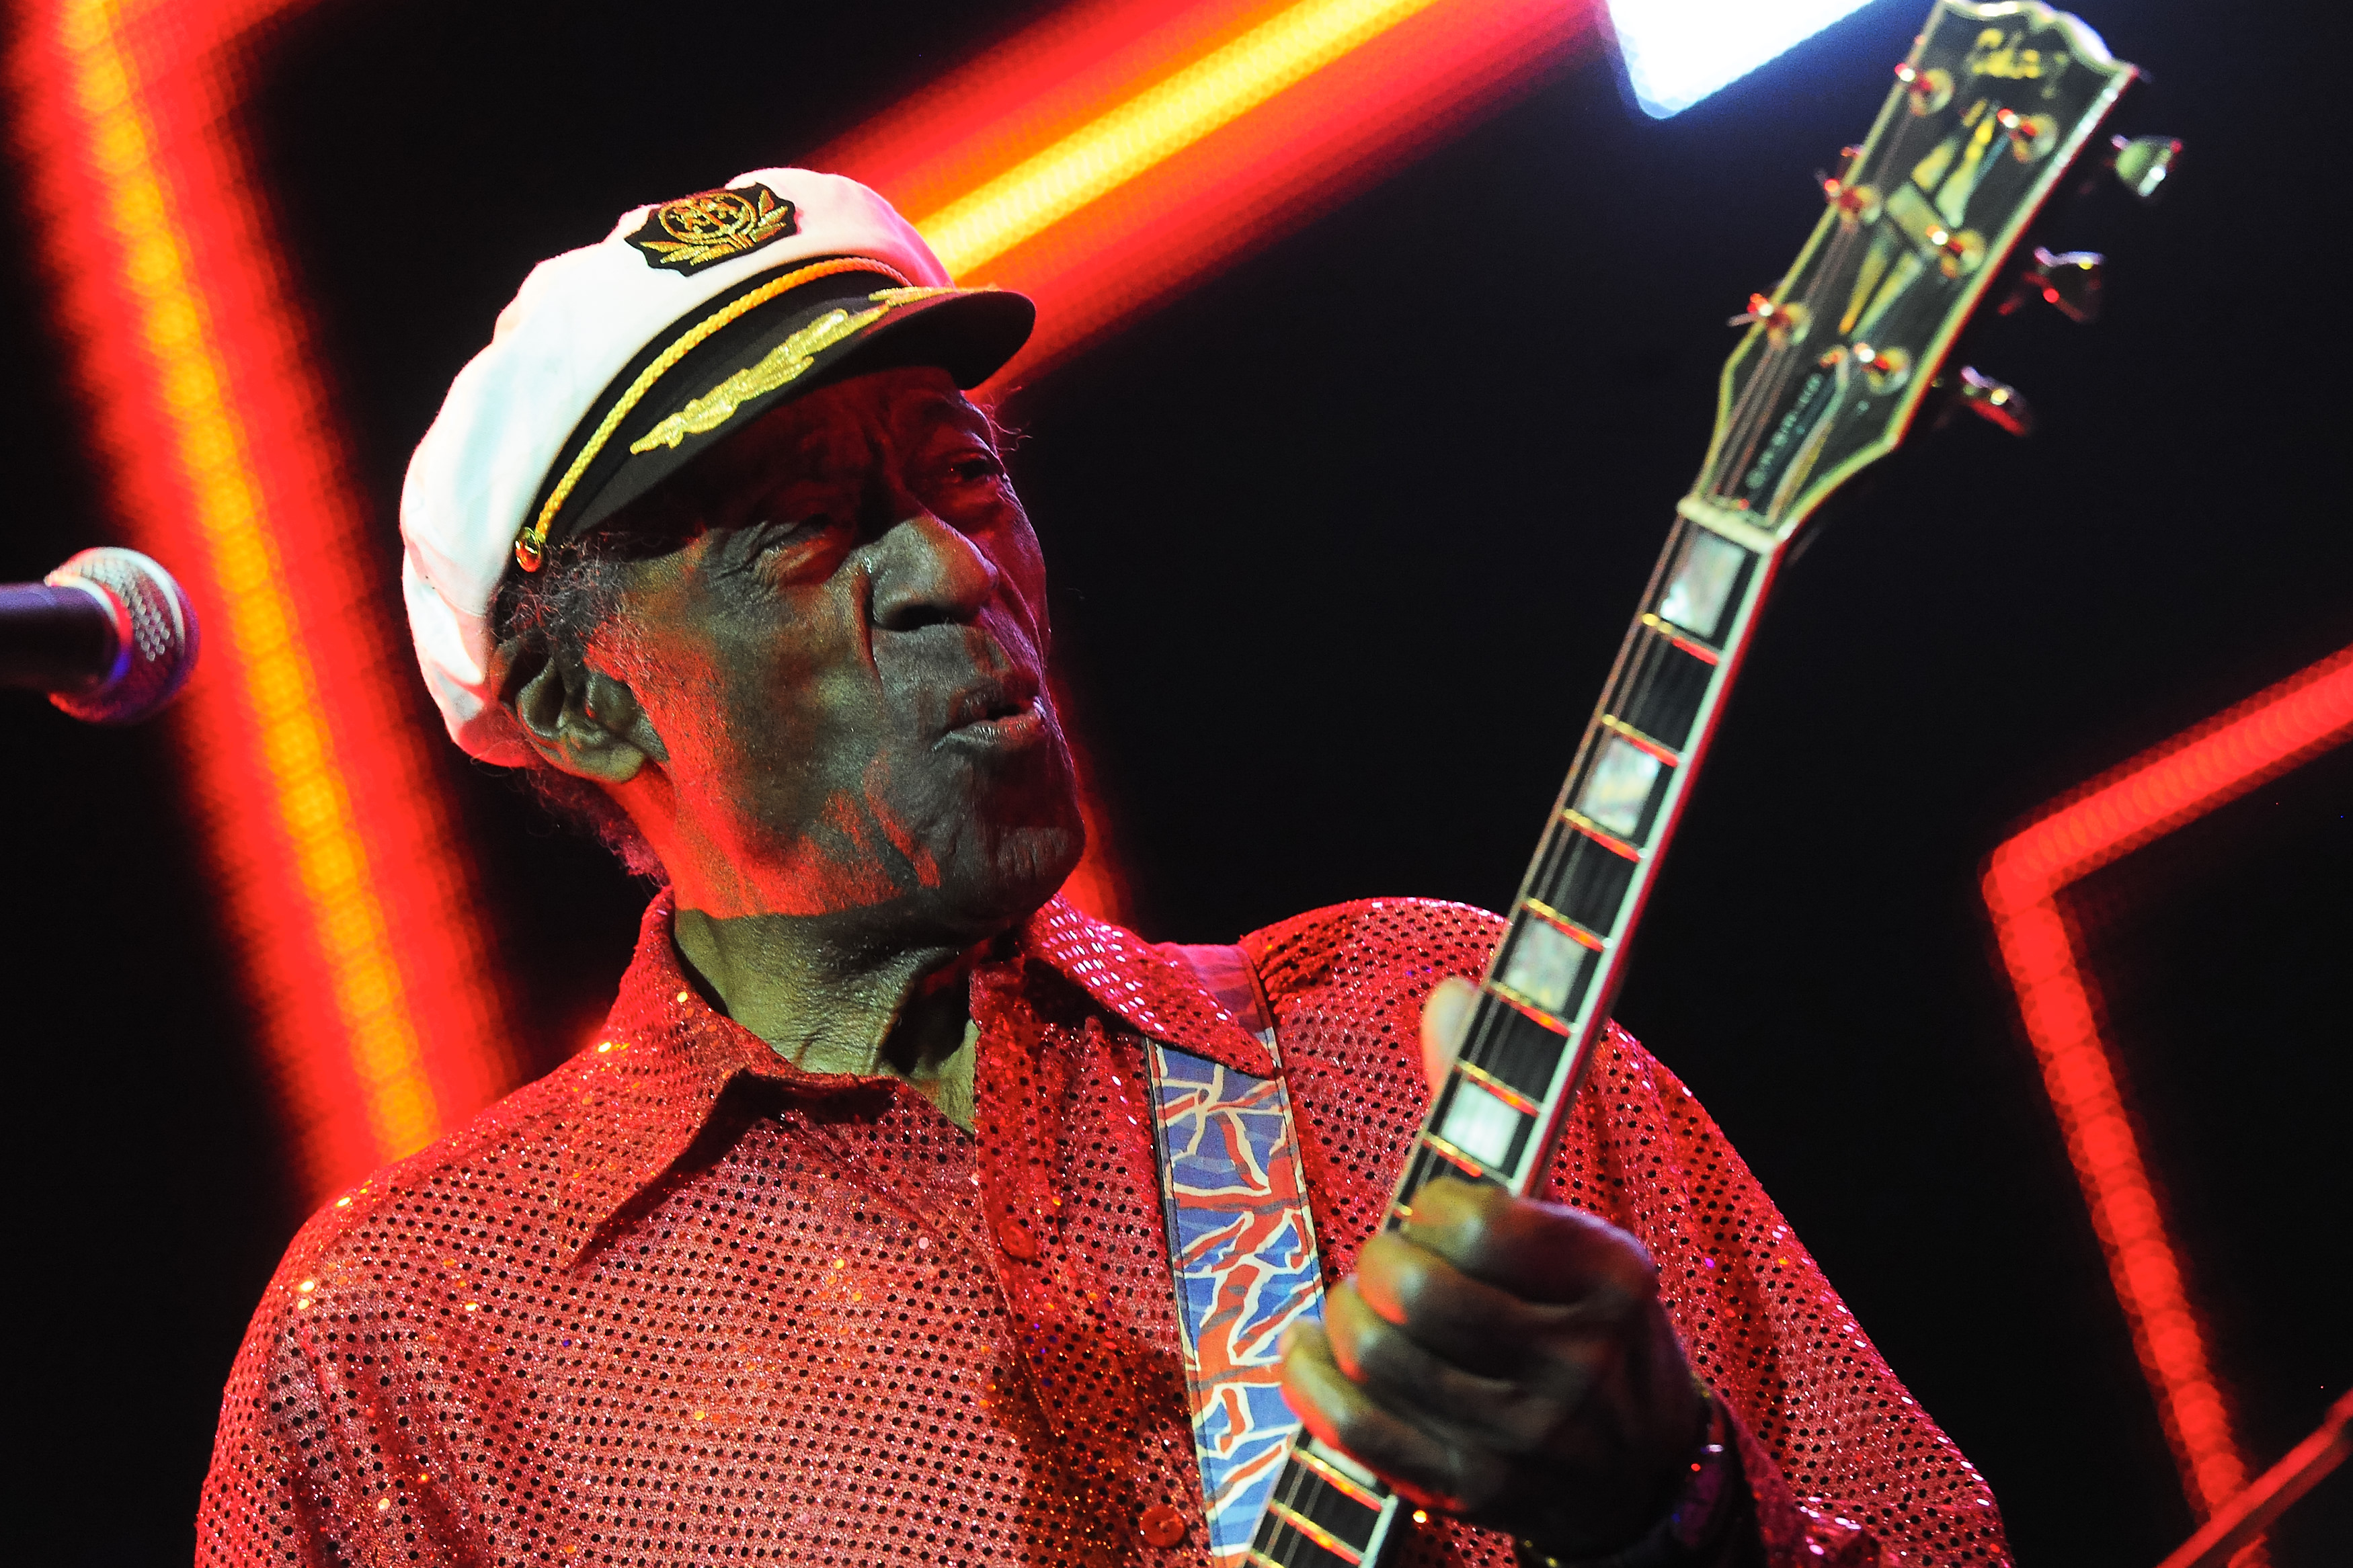 Chuck Berry performs at the Izvestia Hall on October 20, 2013 in Moscow, Russia. (Yuri Martianov—Kommersant/Getty Images)